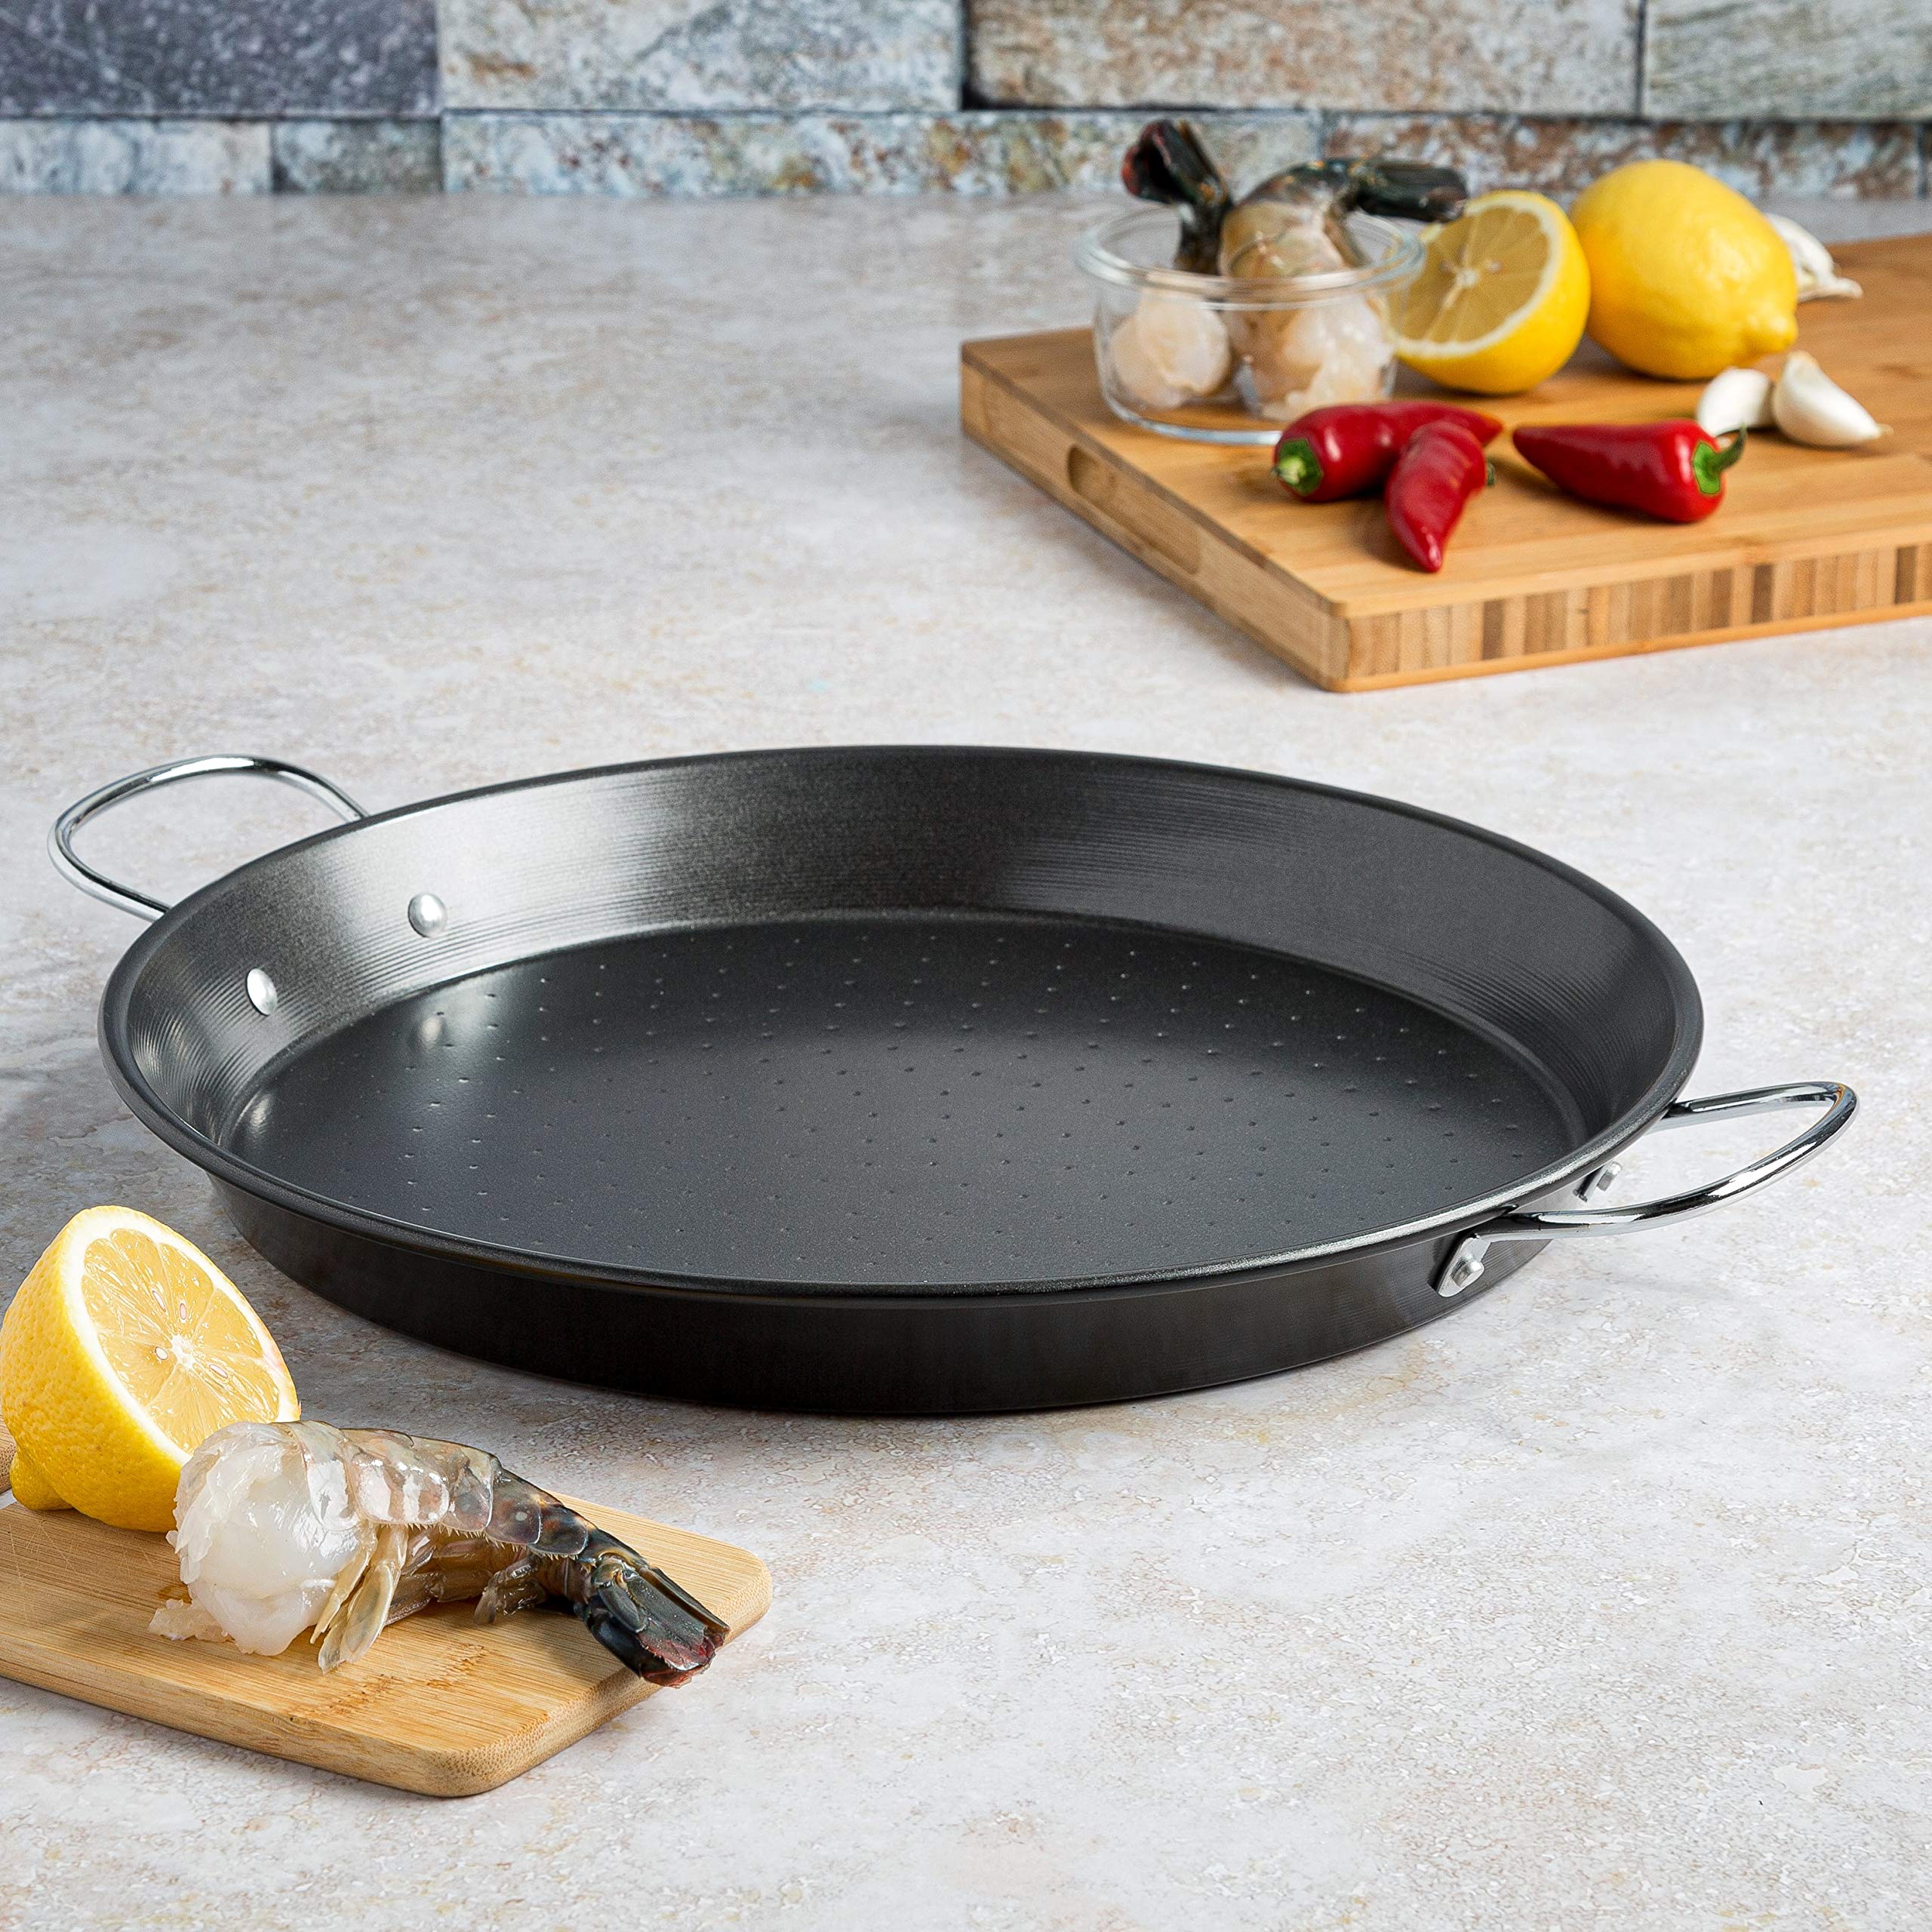 Ecolution Sol Paella Pan – Eco-Friendly PFOA Free Hydrolon Non-Stick – Heavy Duty Carbon steel with Riveted Chrome Plated Handles – Dishwasher Safe – Limited – Black– 15” Diameter